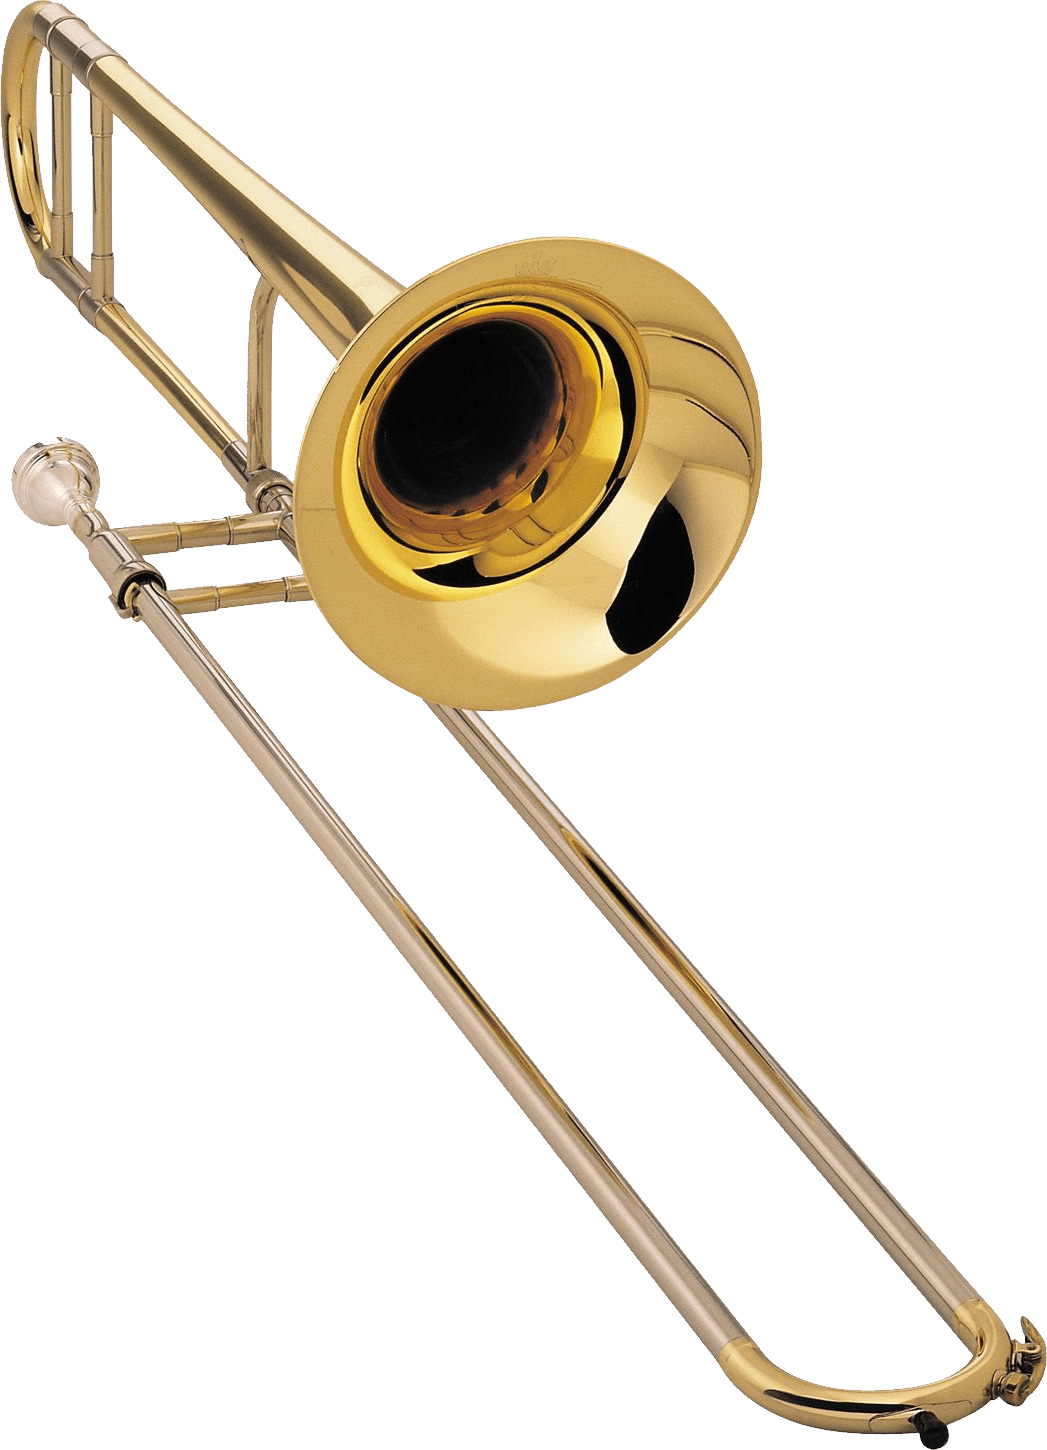 Trombone png icons